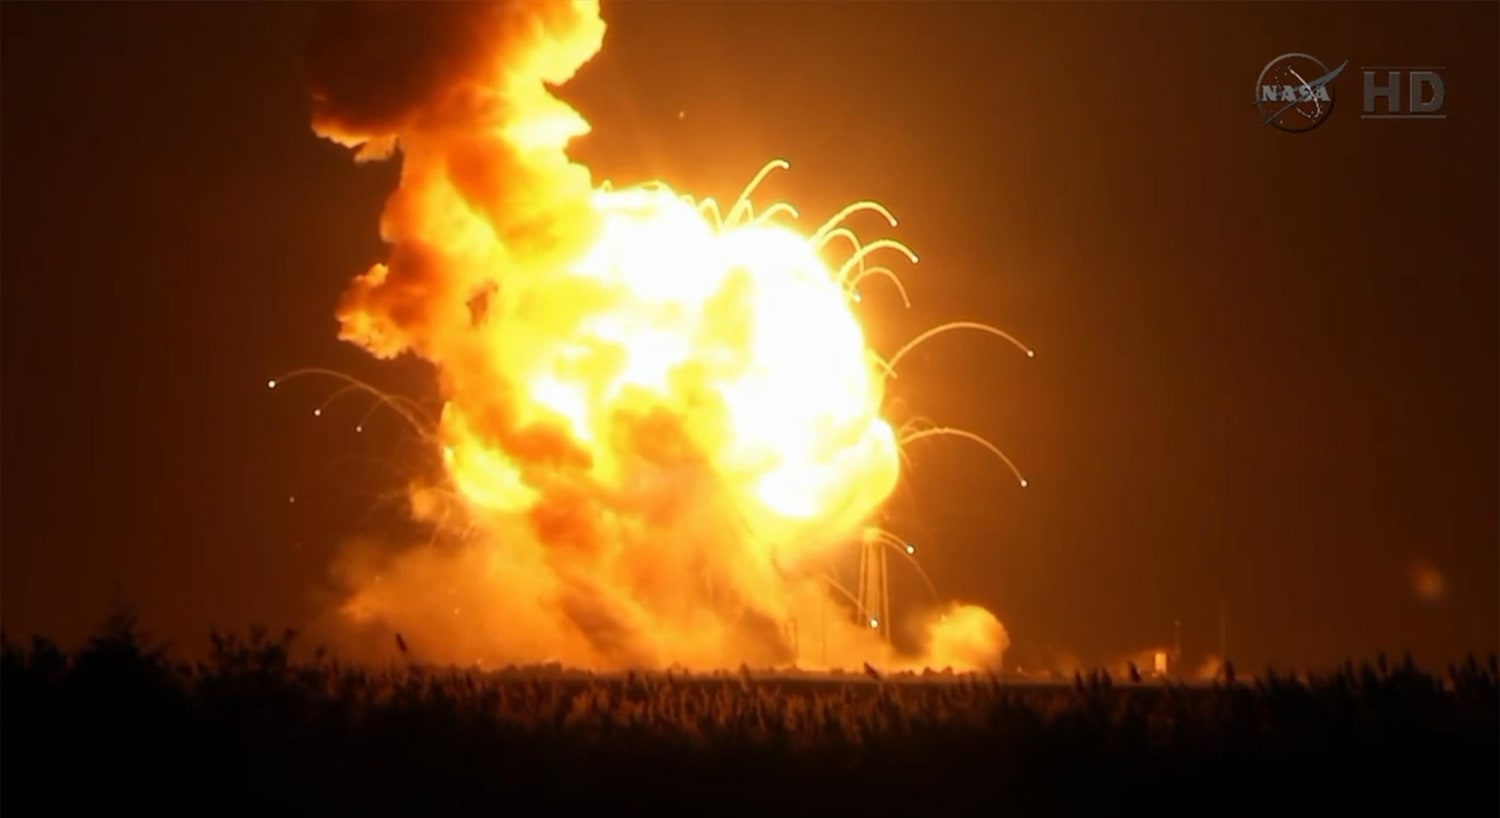 The Antares Rocket Exploded last night Oh the Humanity The